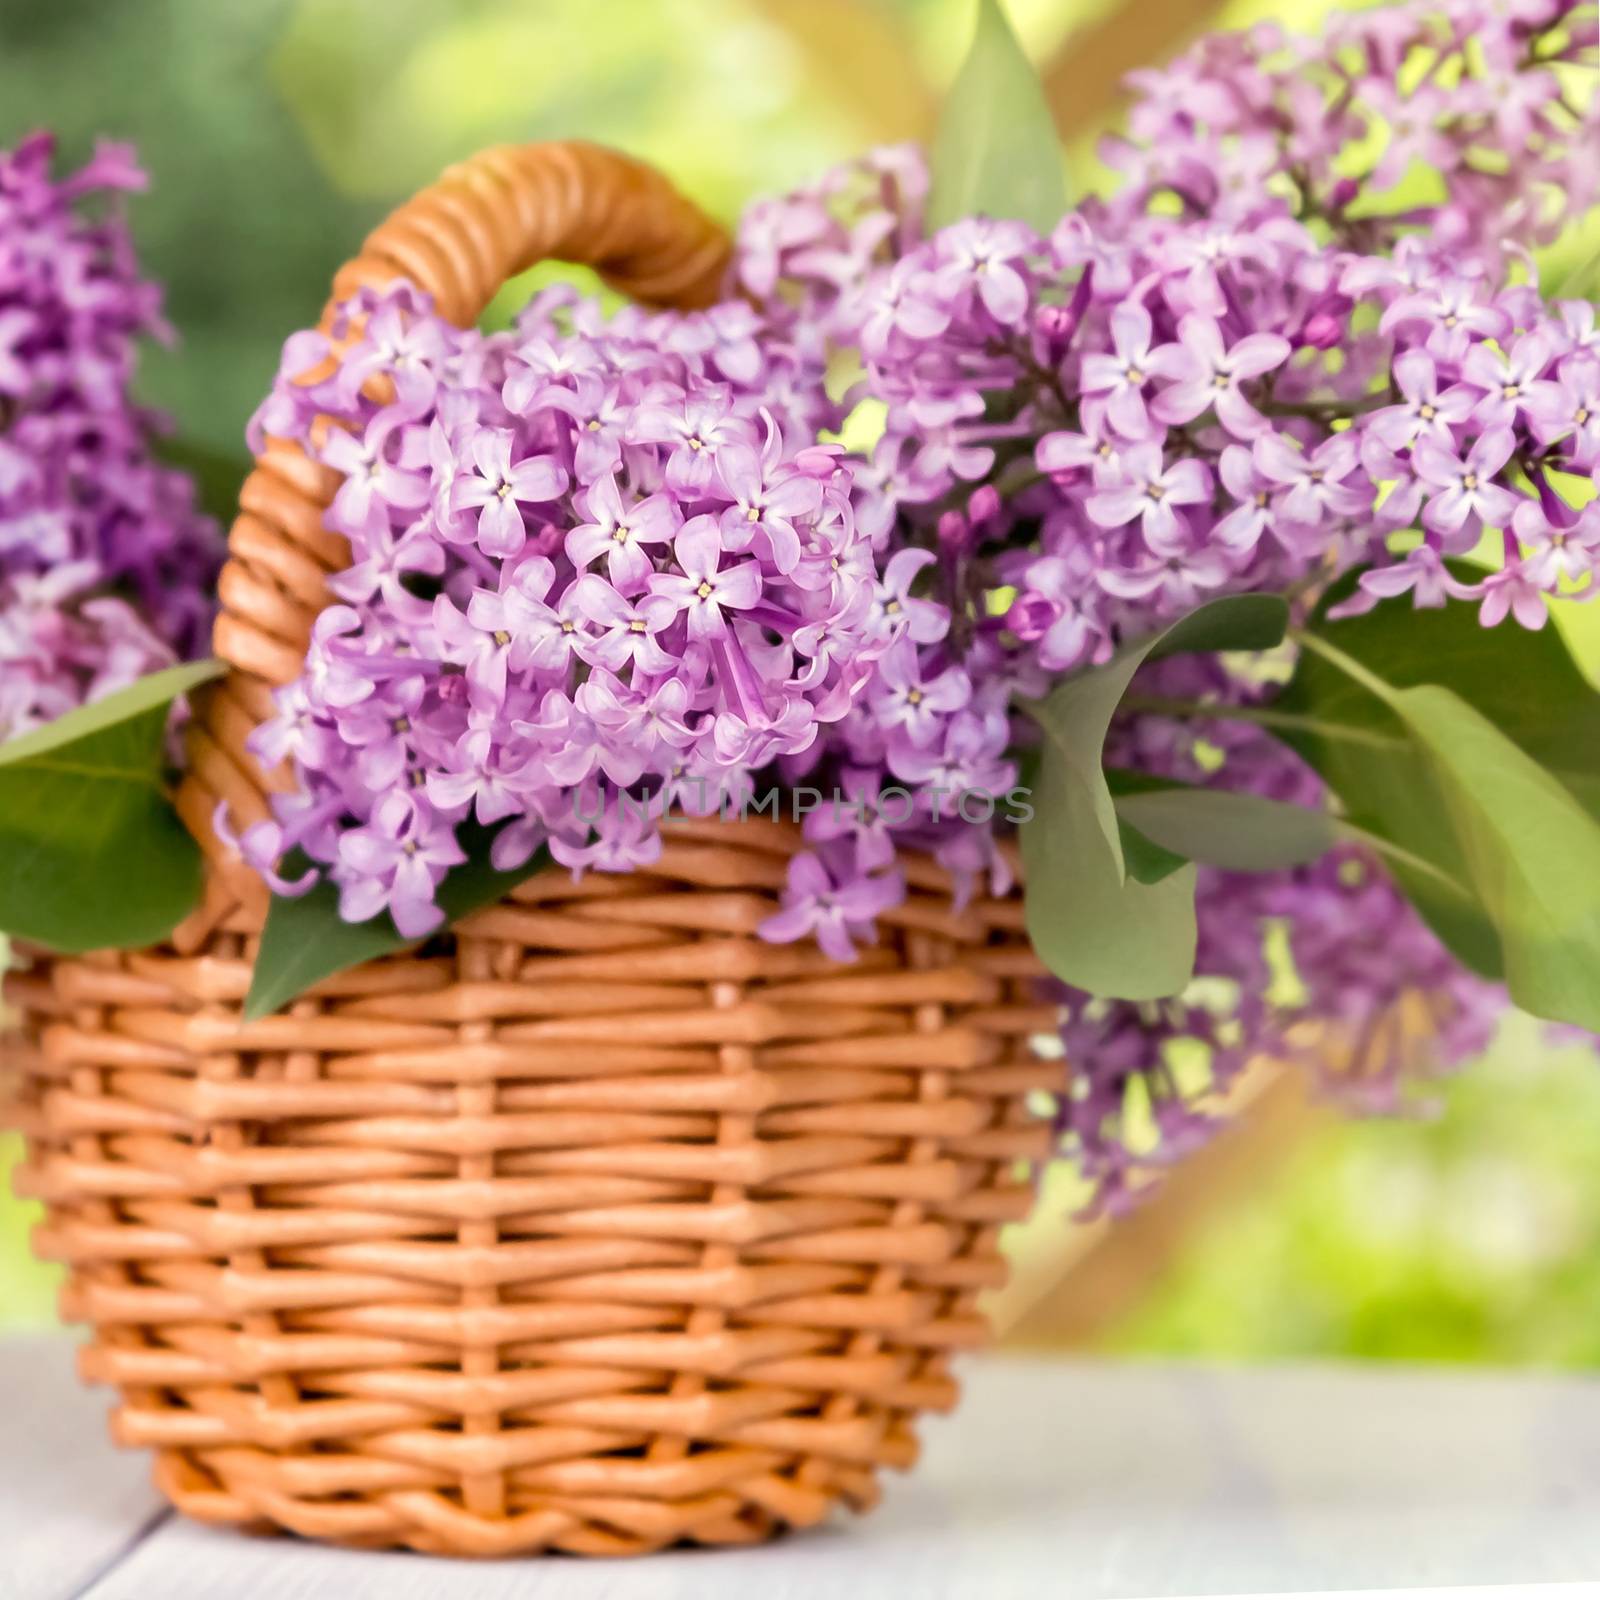 Basket with a bouquet of lilac flowers on a white wooden table in the summerhouse in the garden.